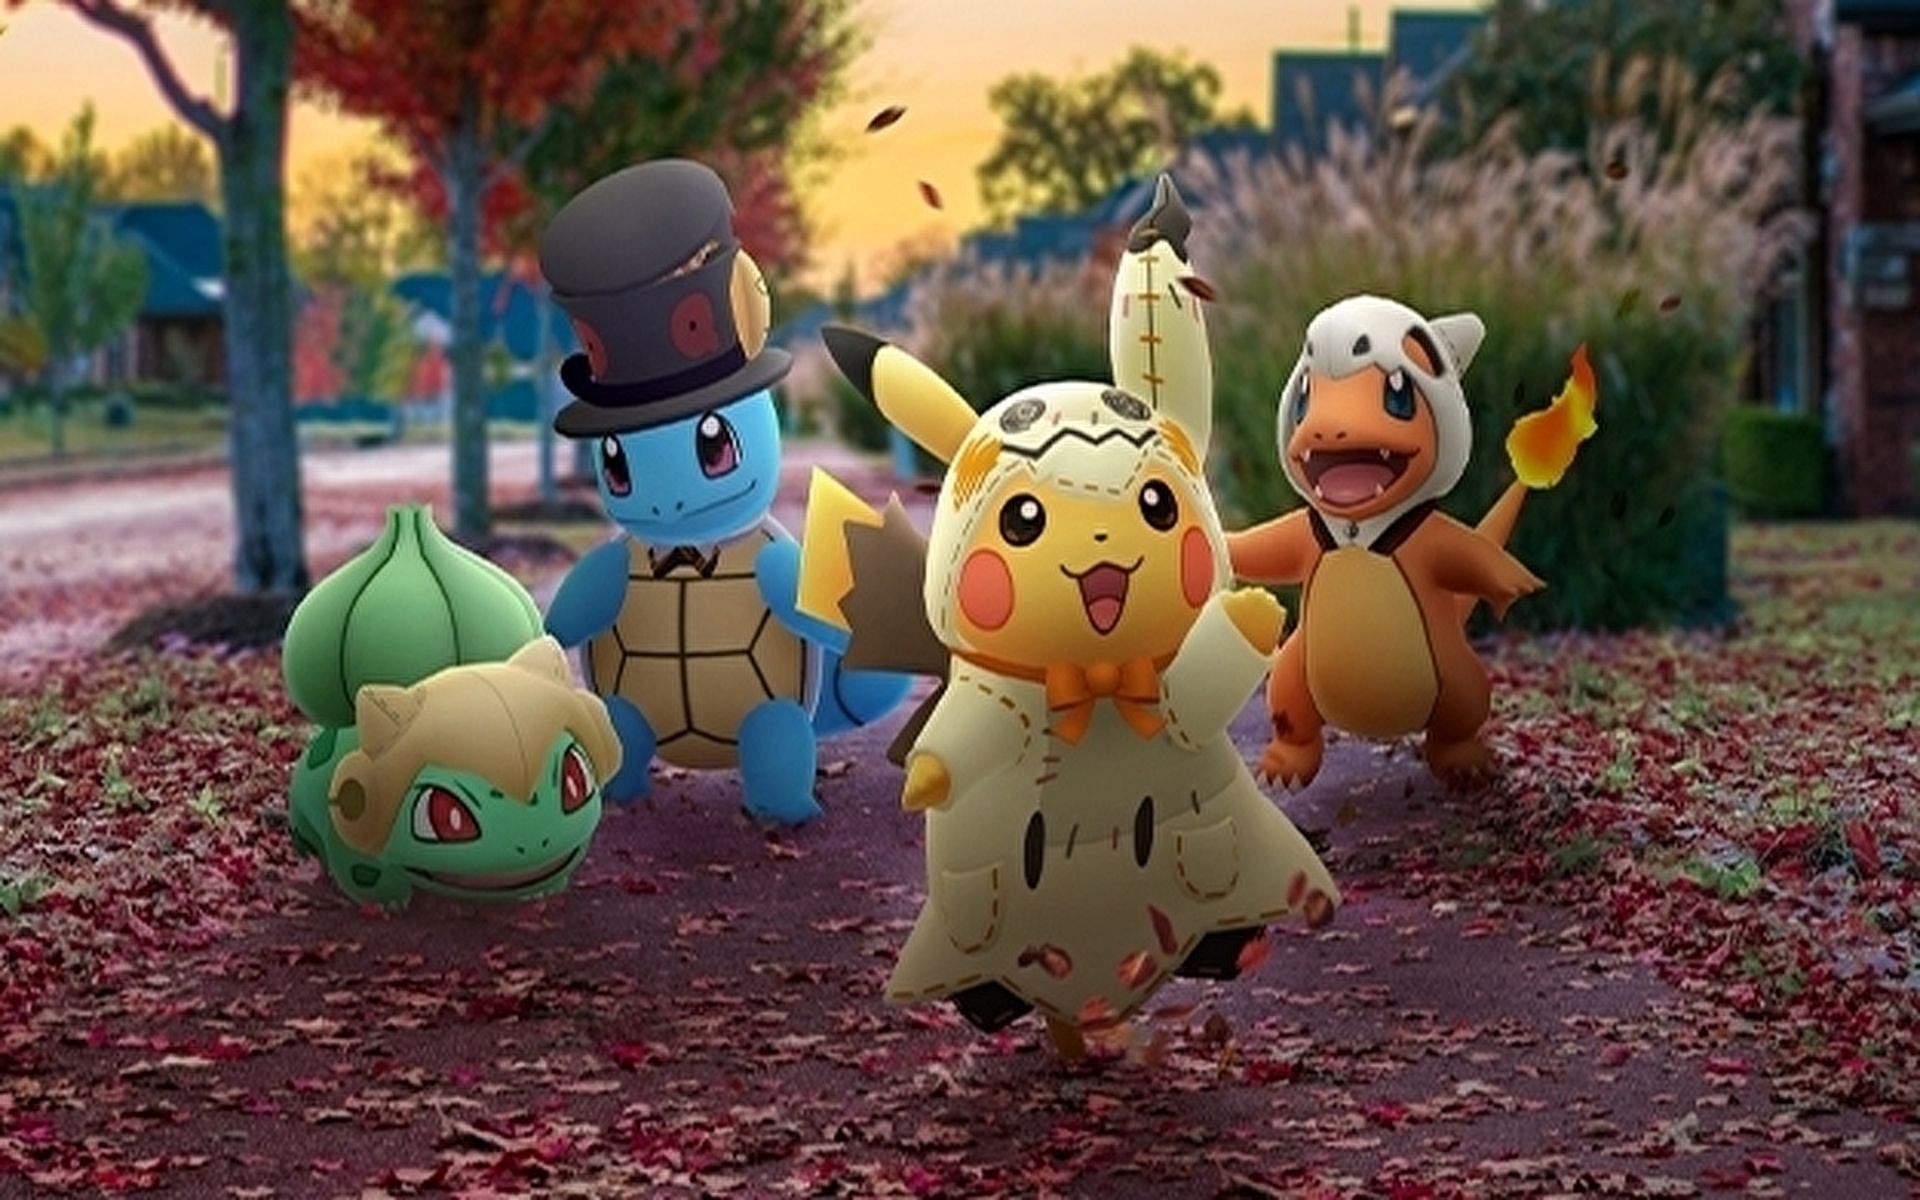 The Pikachu in a Mimikyu costume was one of several costumes for the 2019 Halloween Event (Image via Niantic)